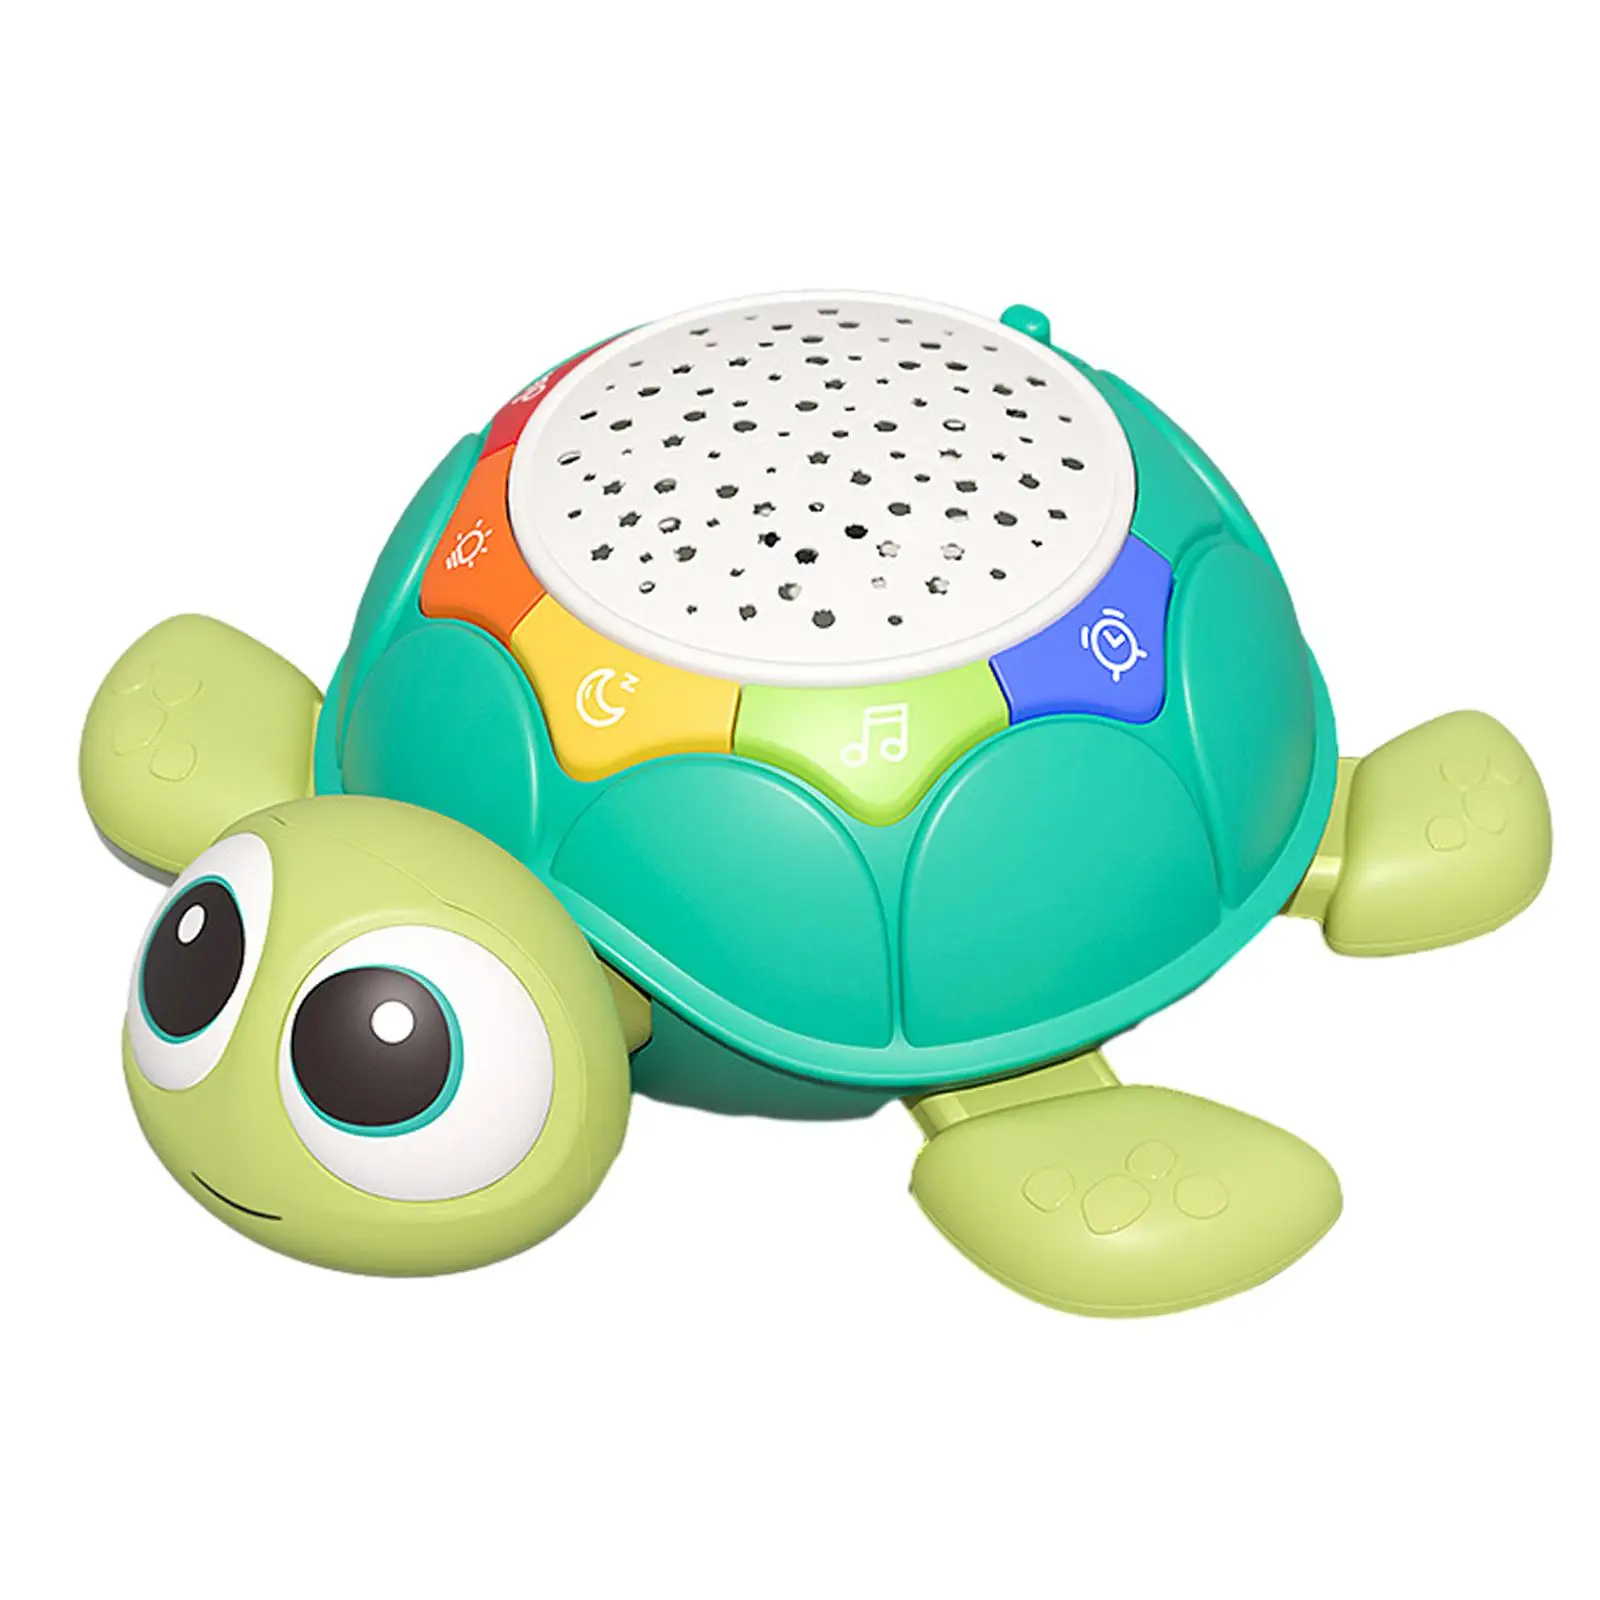 Turtle Crawling Musical Baby Toys Early Learning Birthday Gift Tummy Time Baby Crawling Toy for 6 to 12 Months Girls Boys